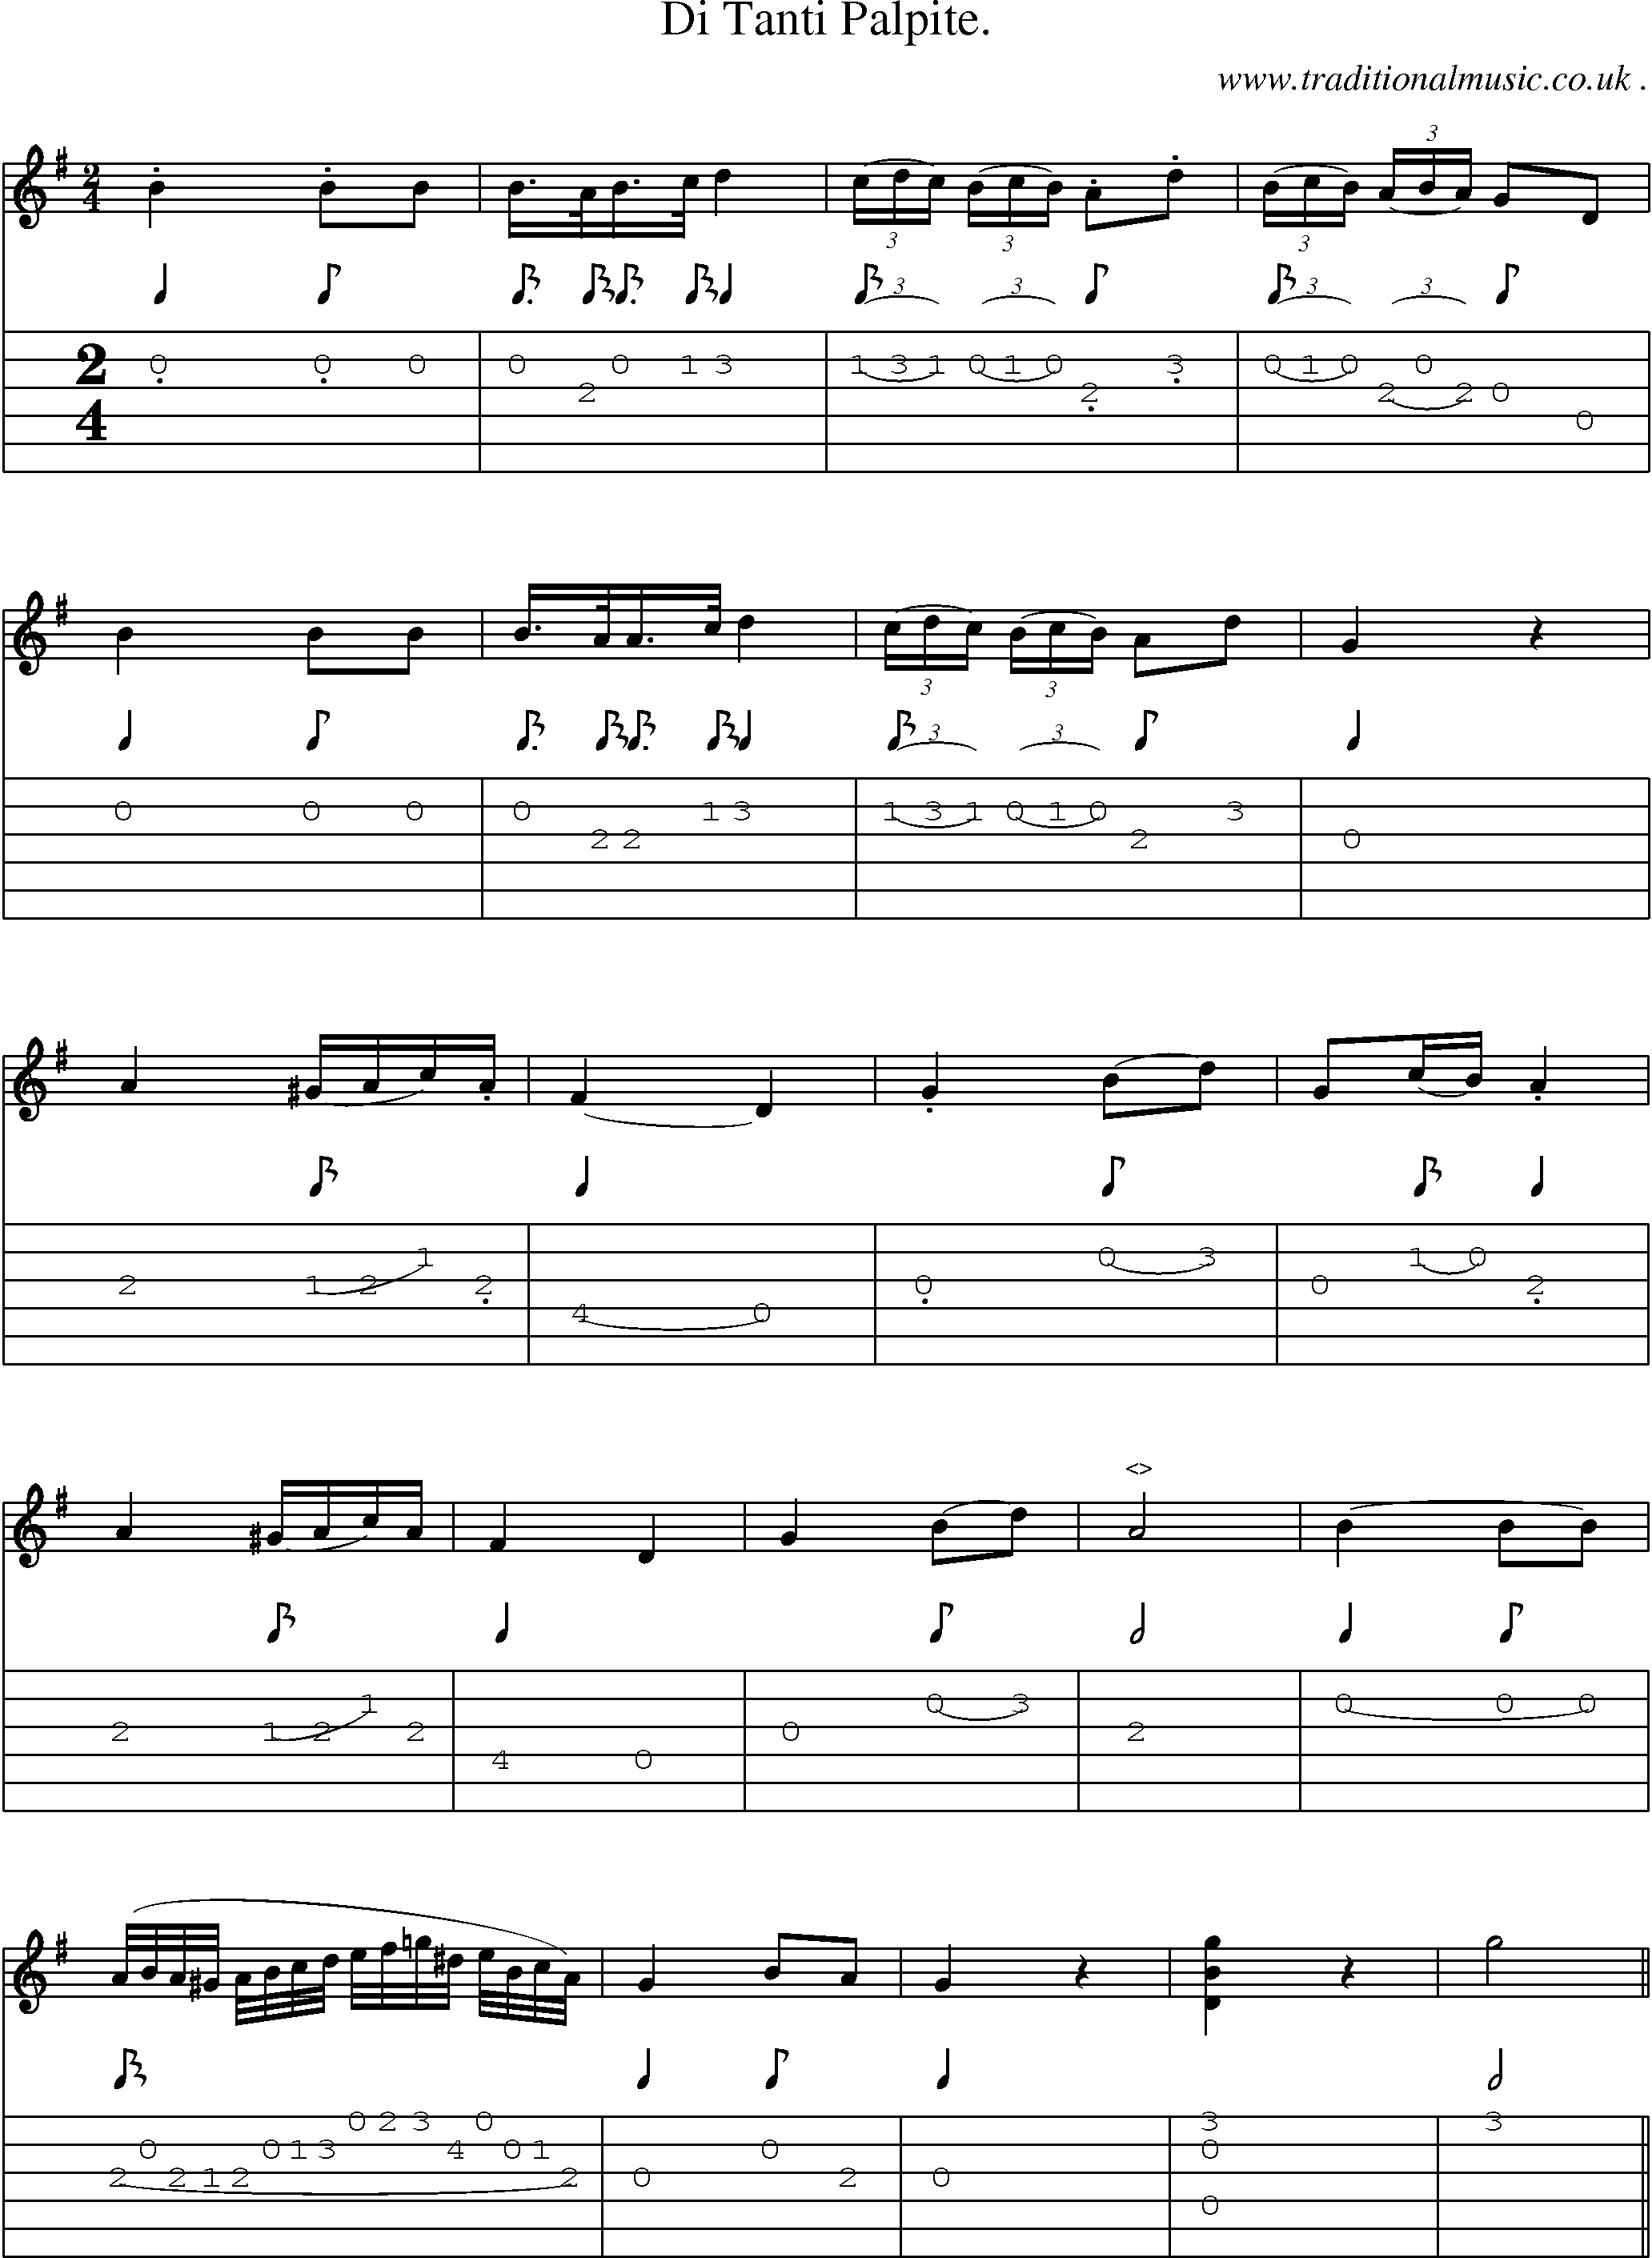 Sheet-Music and Guitar Tabs for Di Tanti Palpite